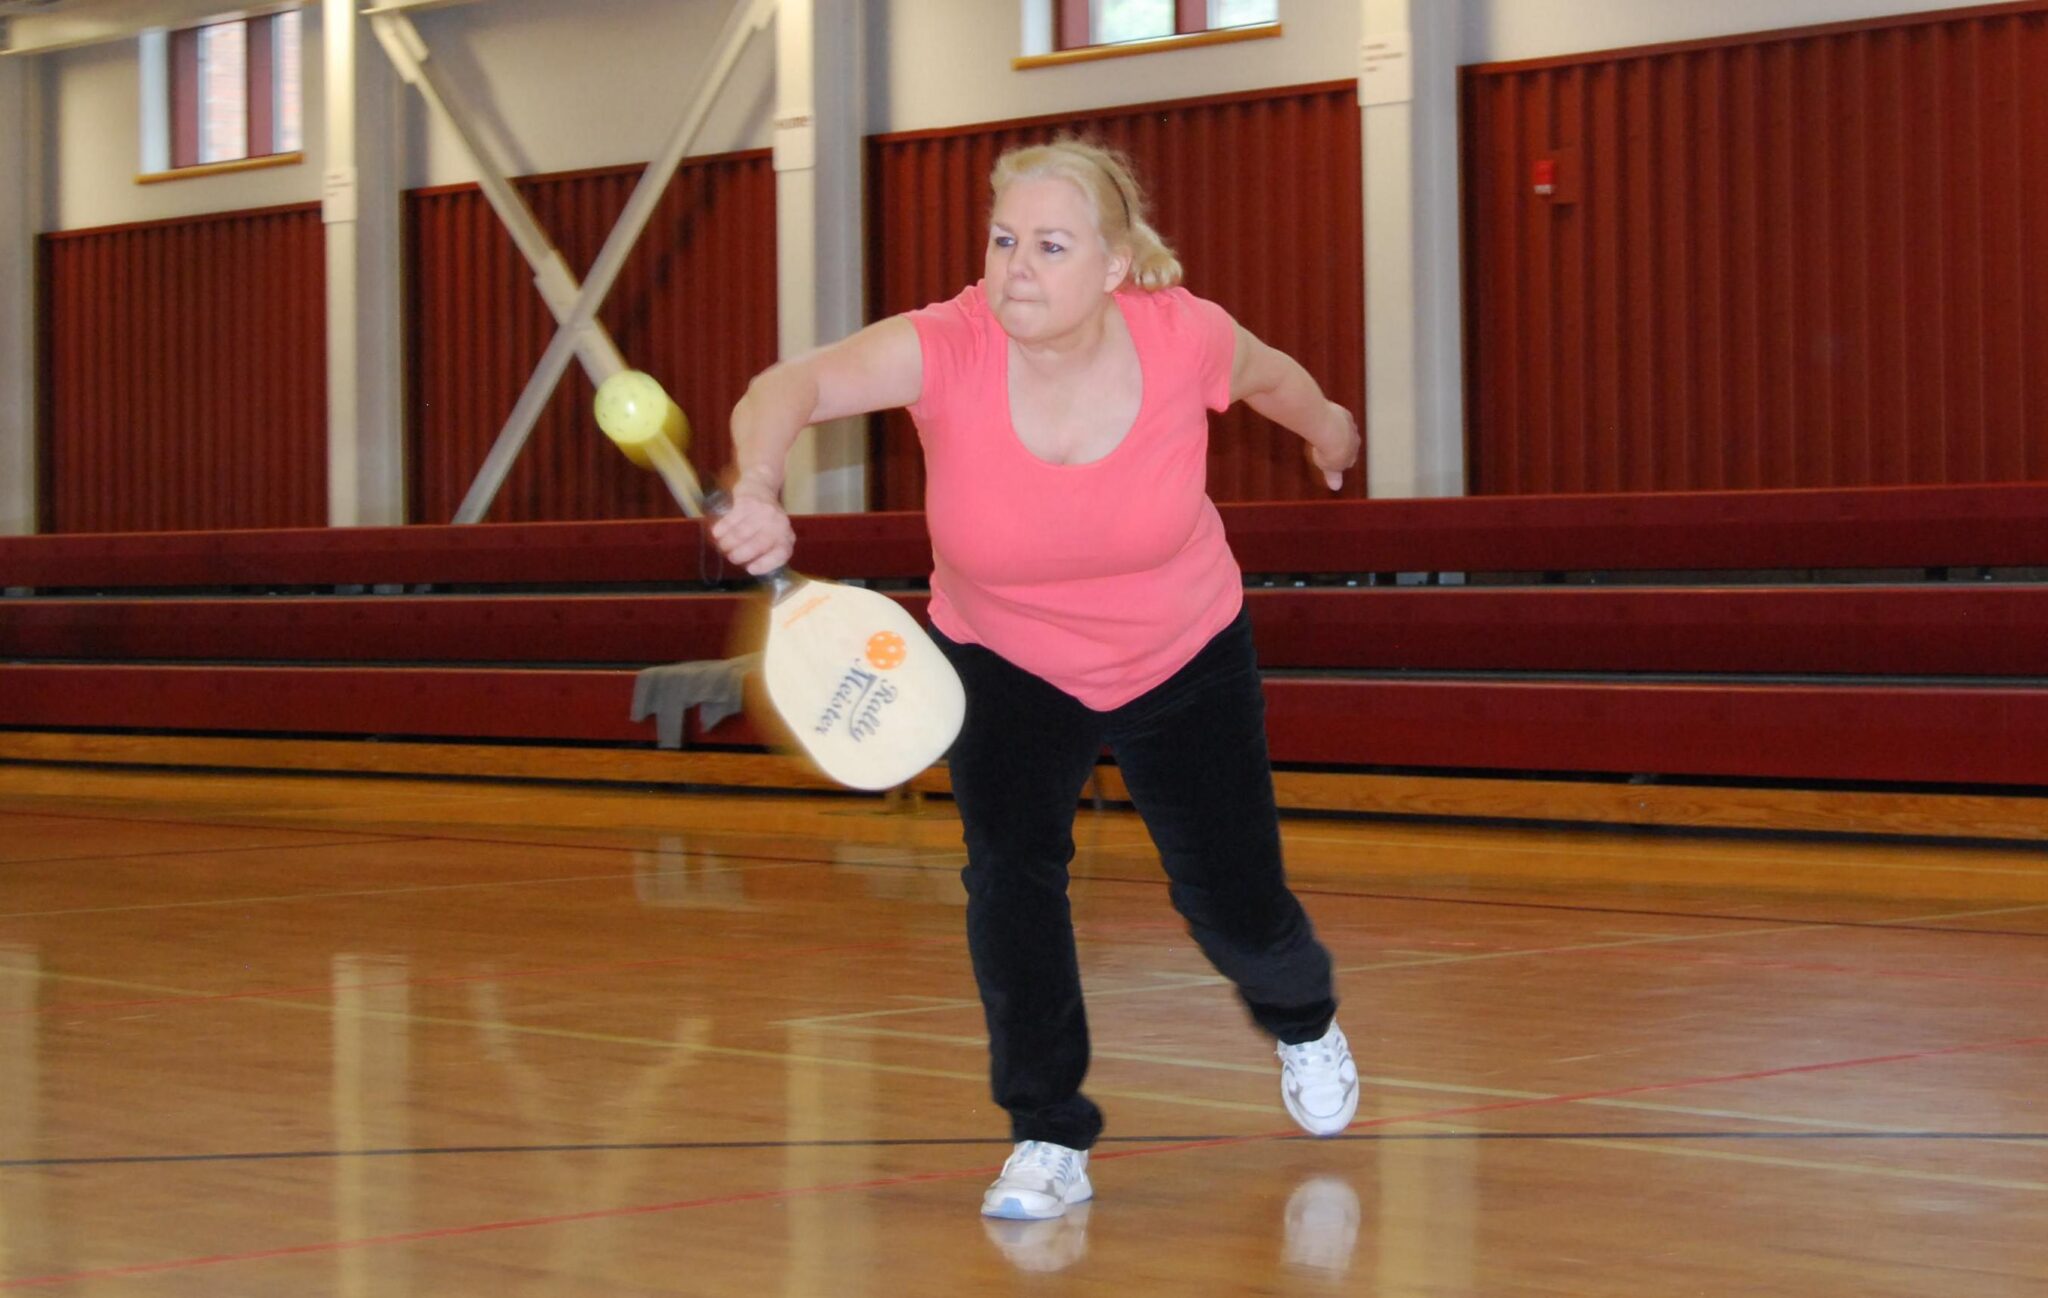 Pickleball is a racquet sport that combines elements of badminton, tennis and table tennis.